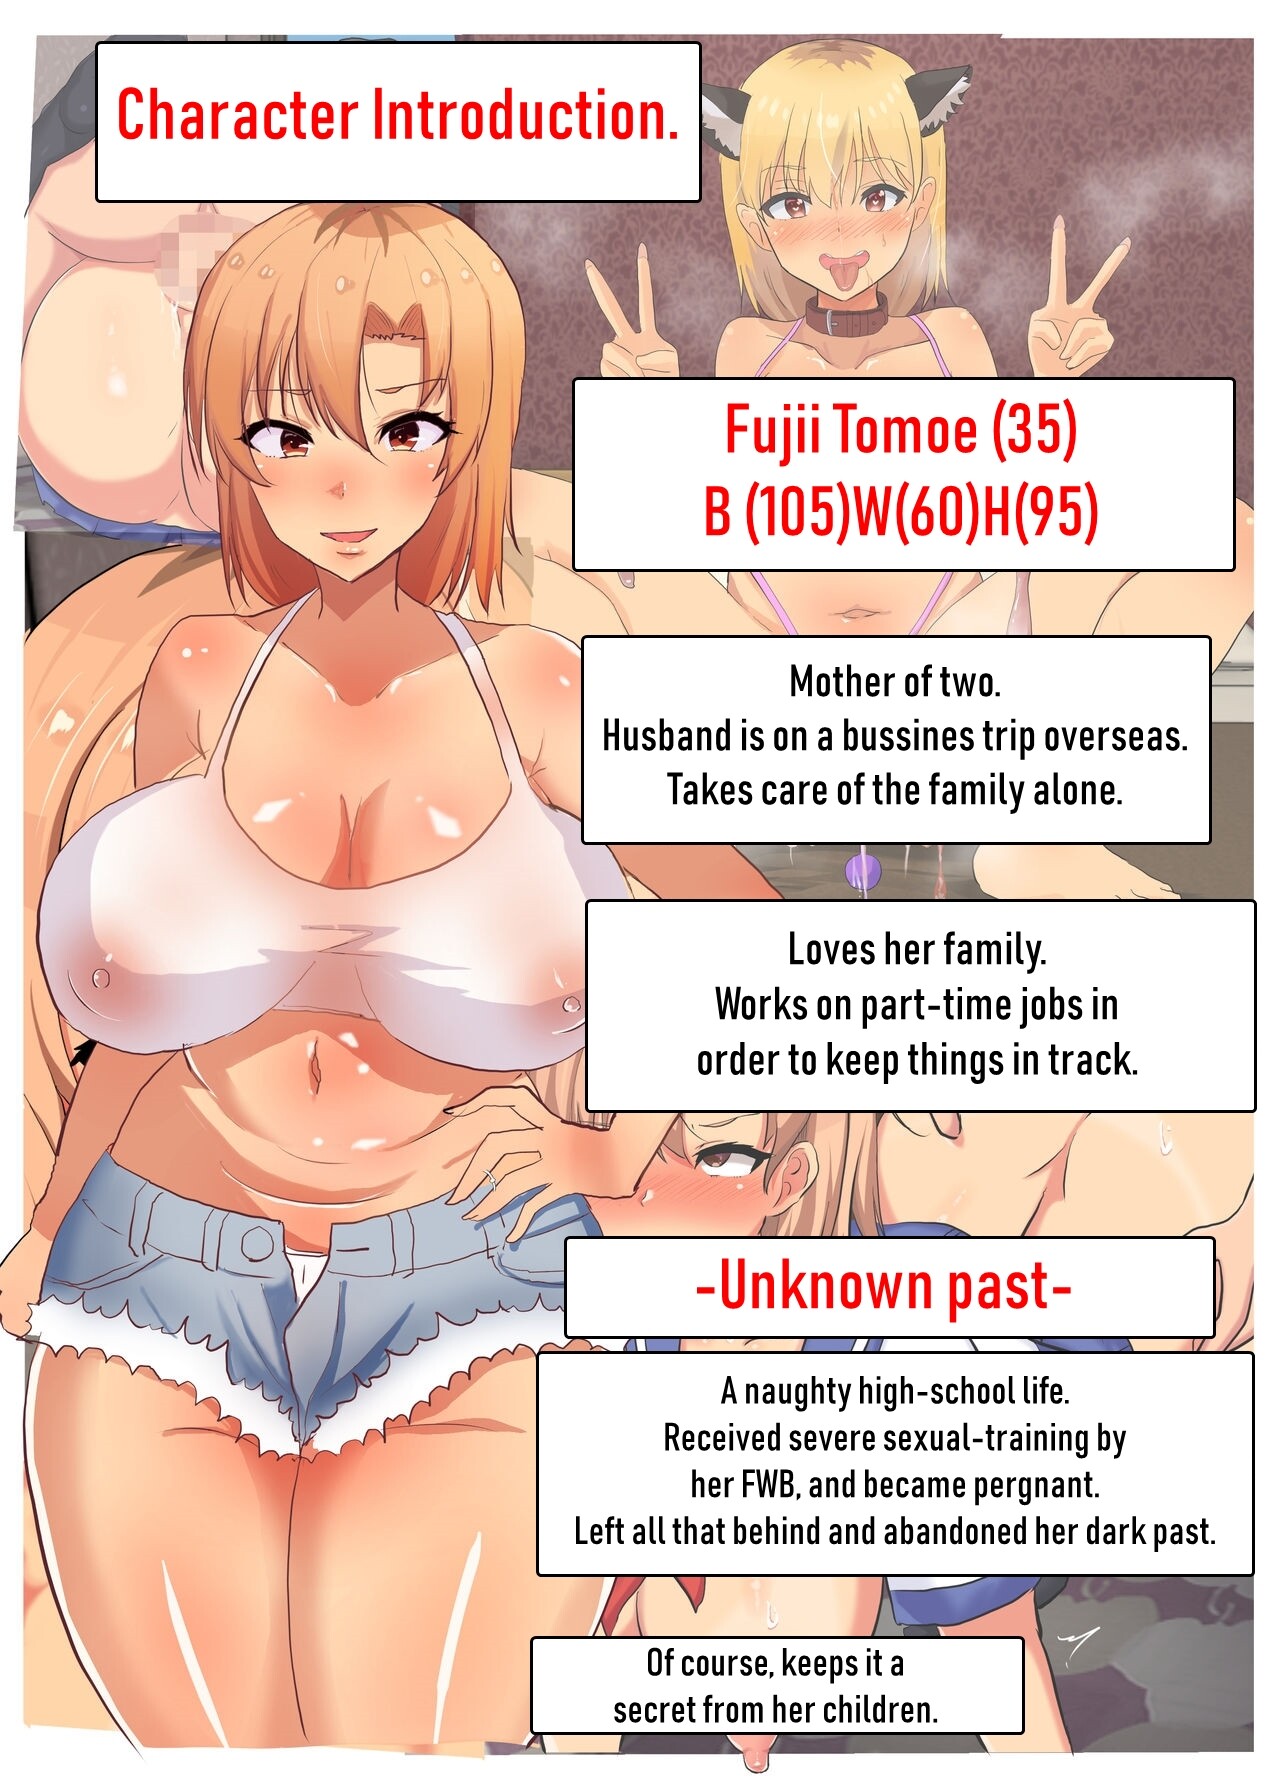 Hentai Manga Comic-~NTR Family~ The story of a strong-willed mother who cares about her family, and her fall into the hands of her son's bully friend.-Read-2